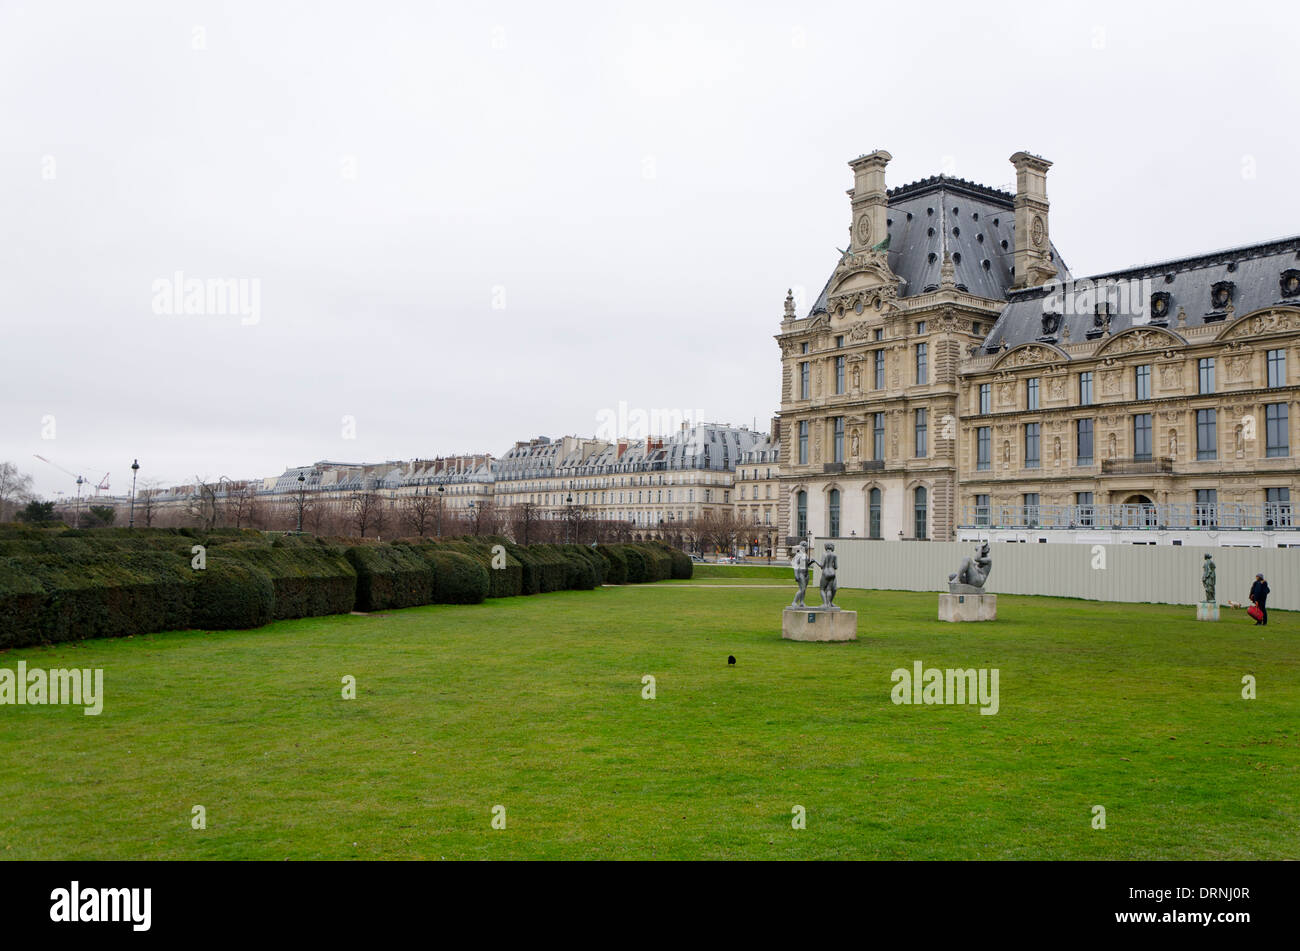 The Louvre Palace, former royal palace gardens and now museum and Rue de Rivoli in background, and sculptures, Paris, France. Stock Photo